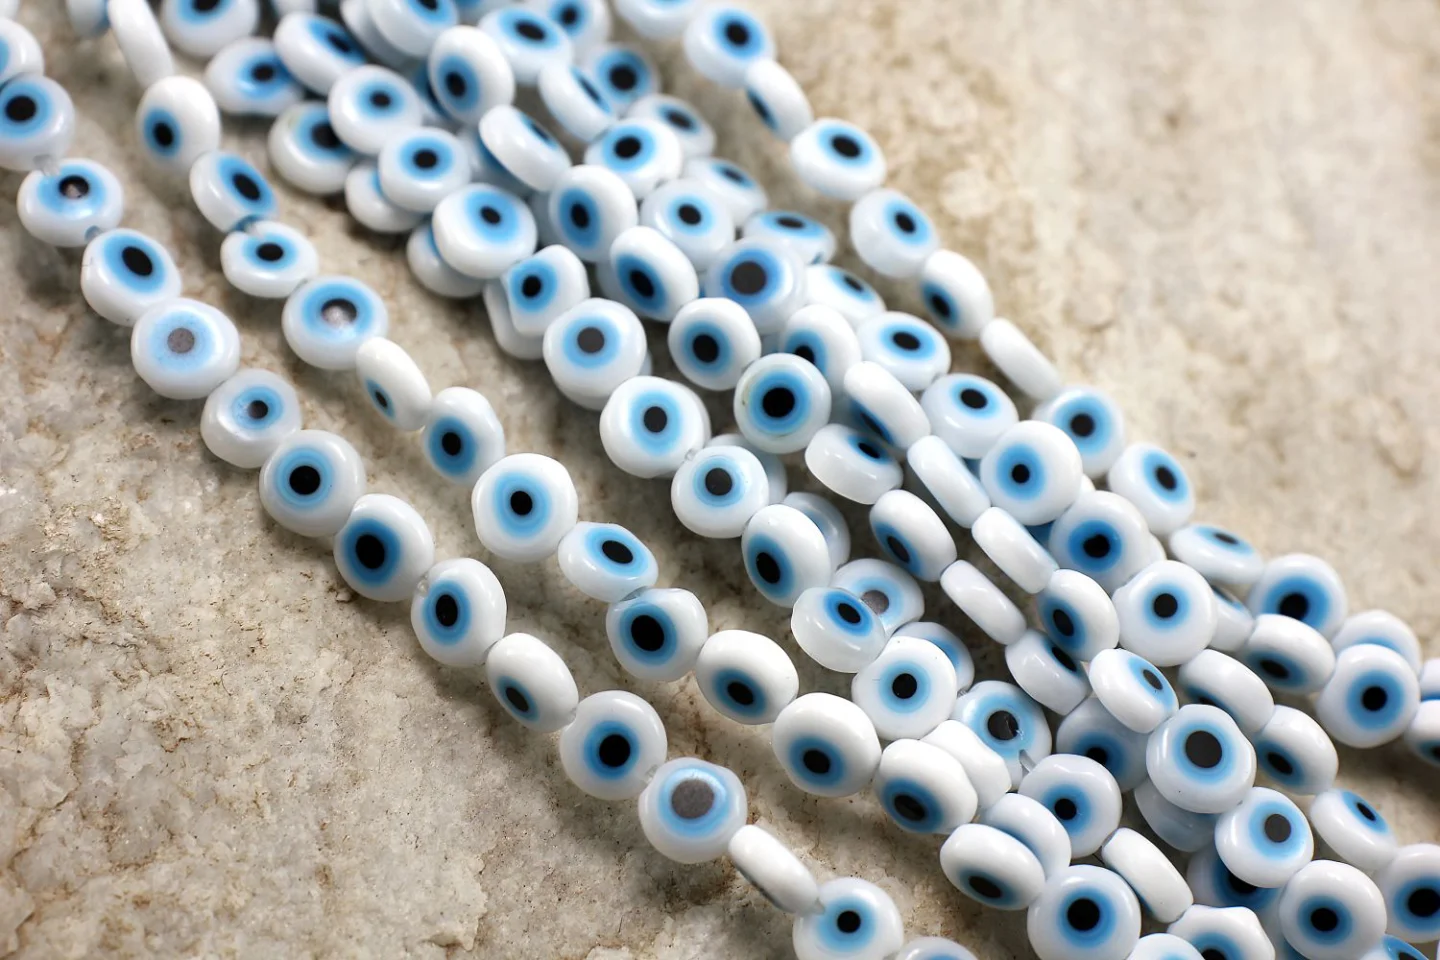 6mm-opaque-white-glass-evil-eye-beads.